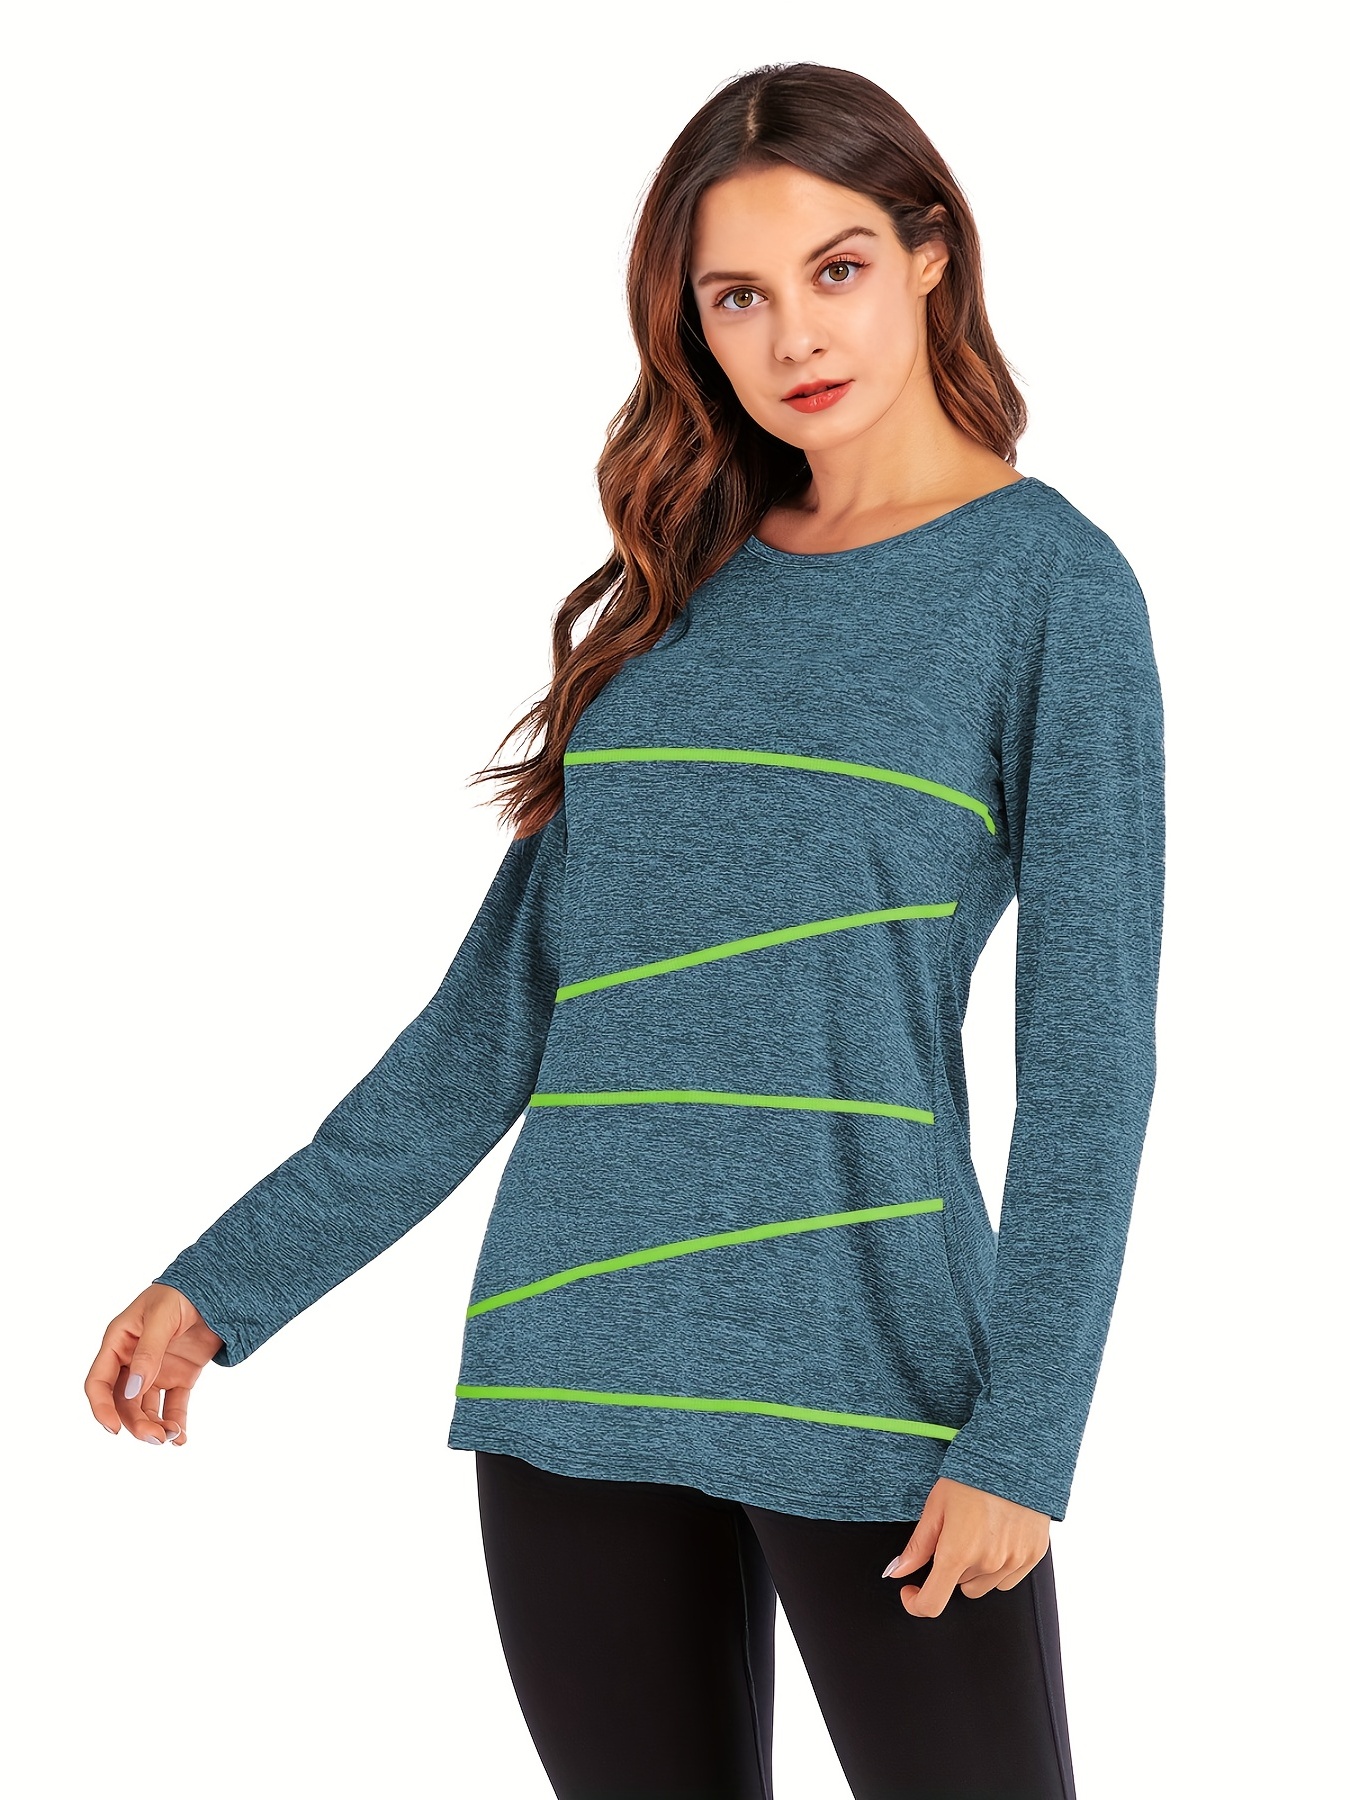 Activewear T-Shirts for Women  Long Sleeve & Short Sleeve